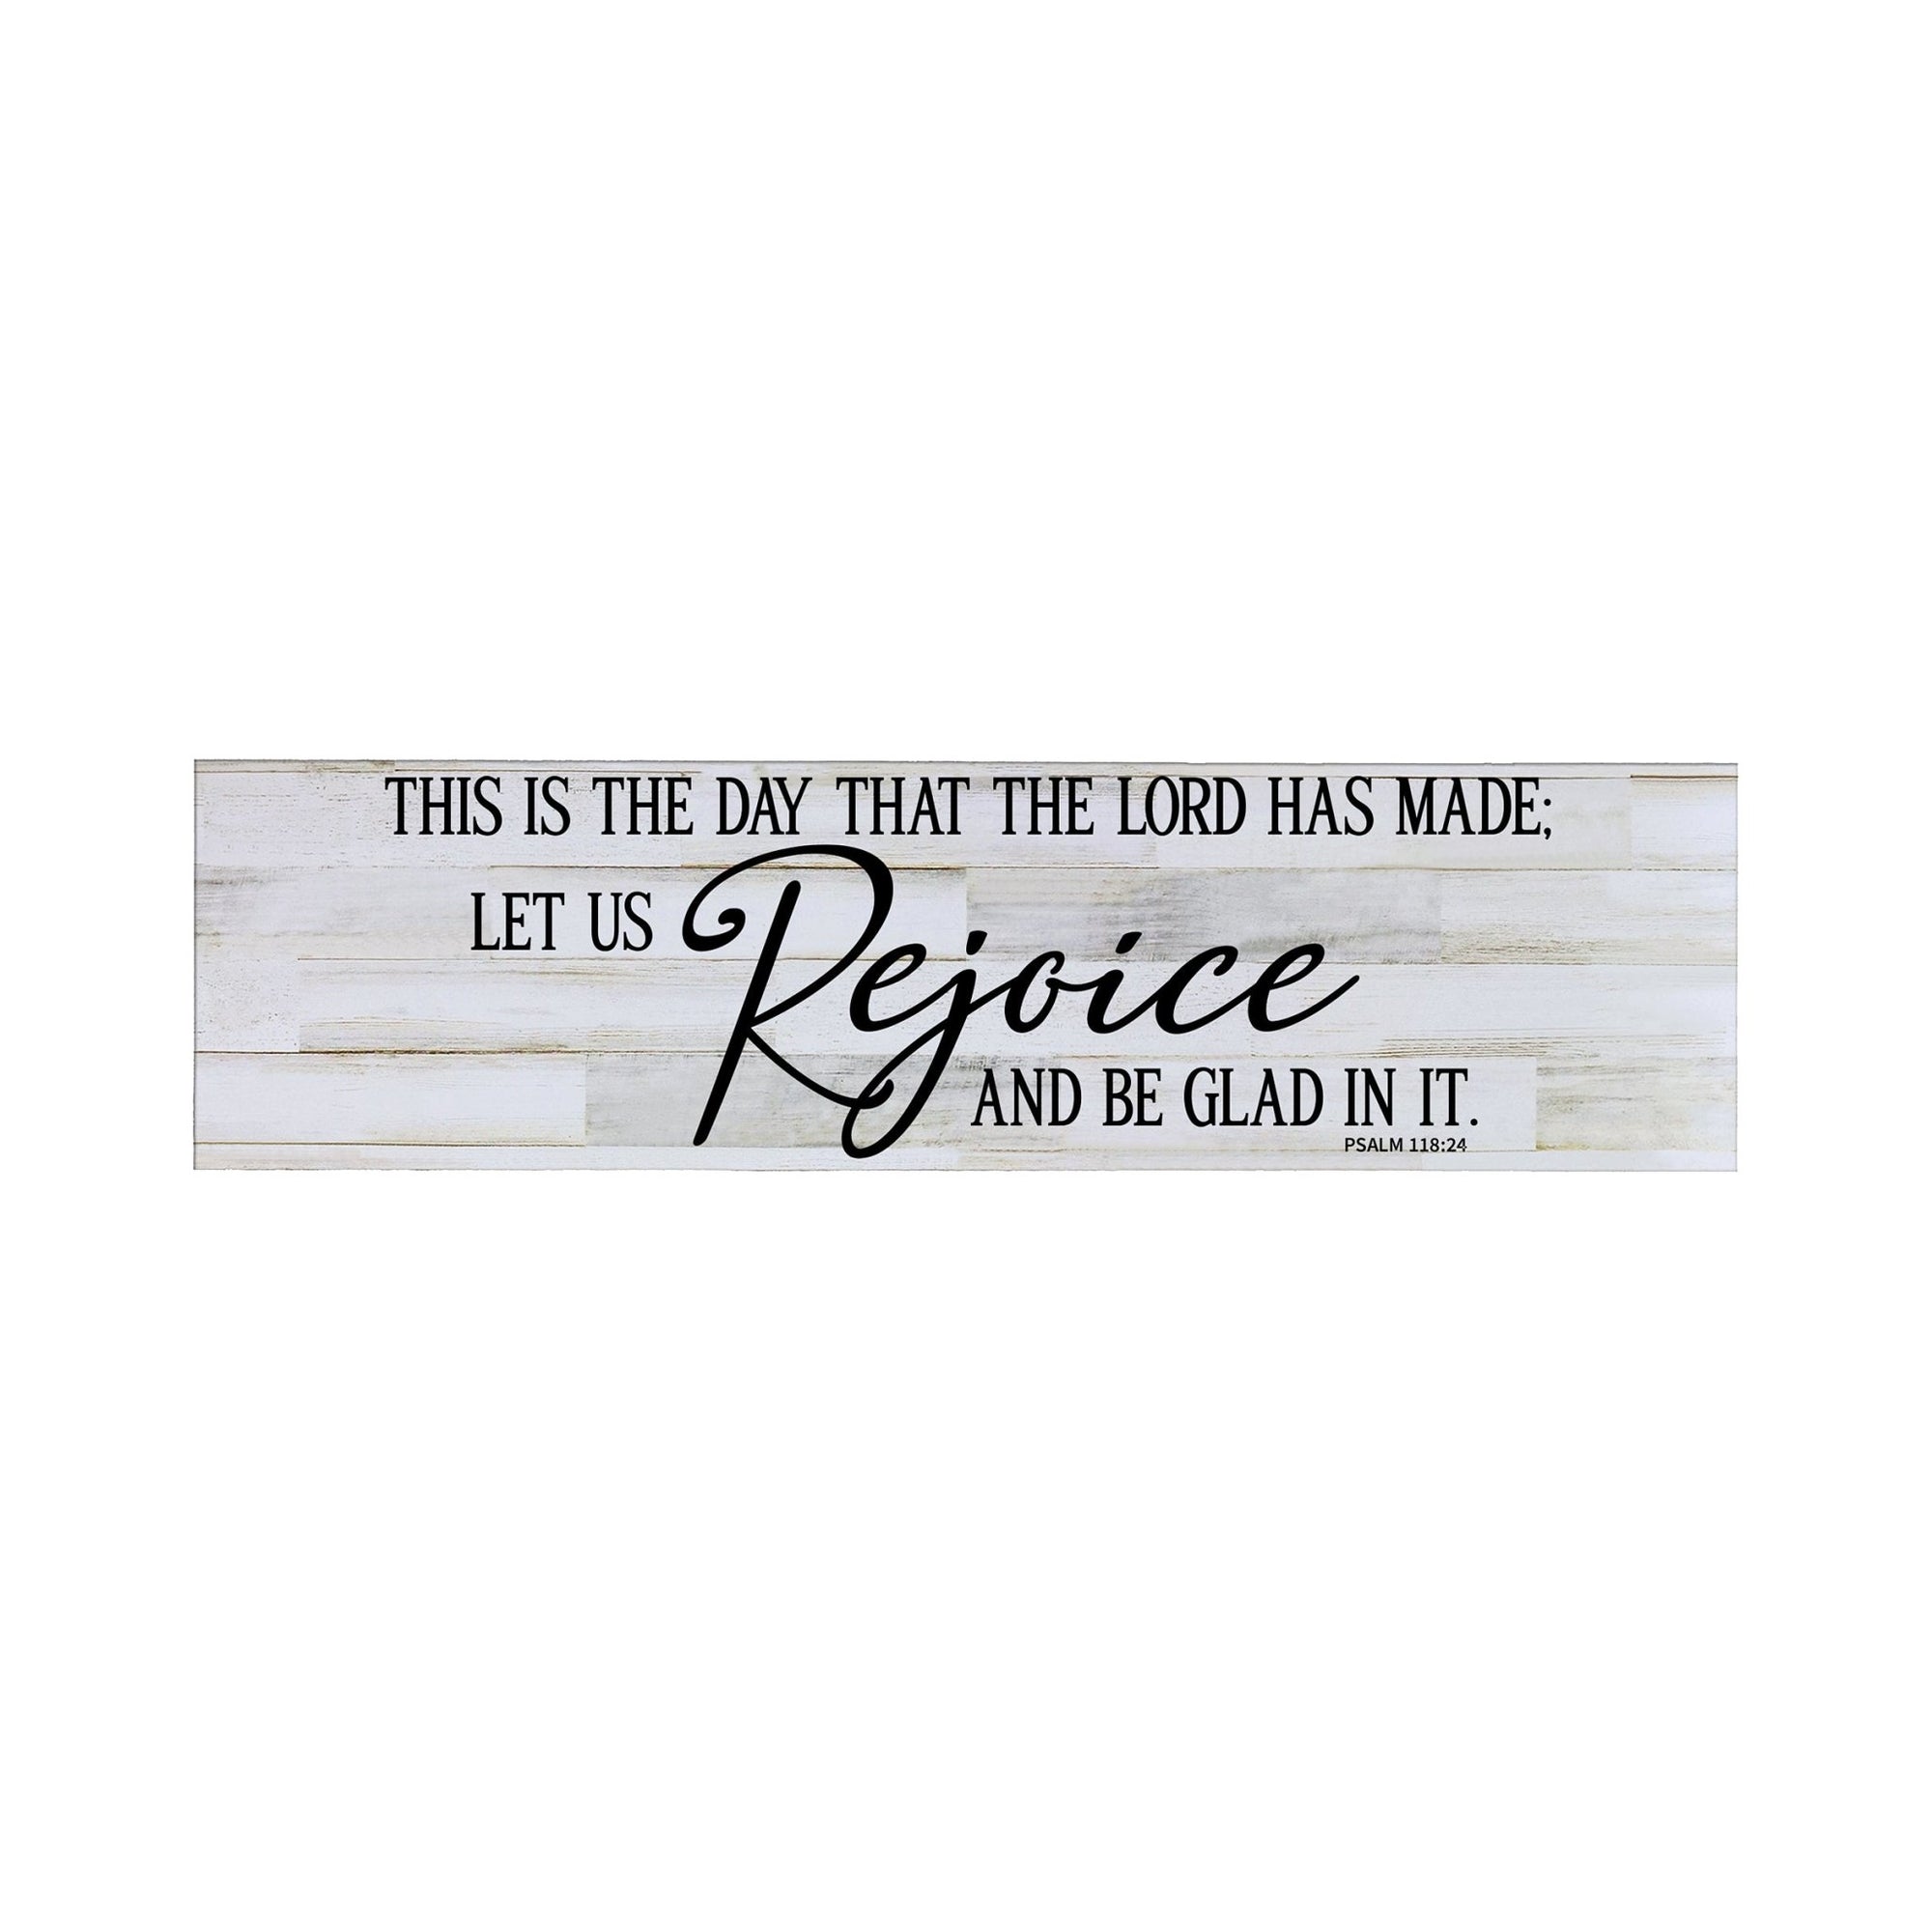 Inspirational Modern Wooden Wall Hanging Plaque 10x40 - This Is The Day - LifeSong Milestones